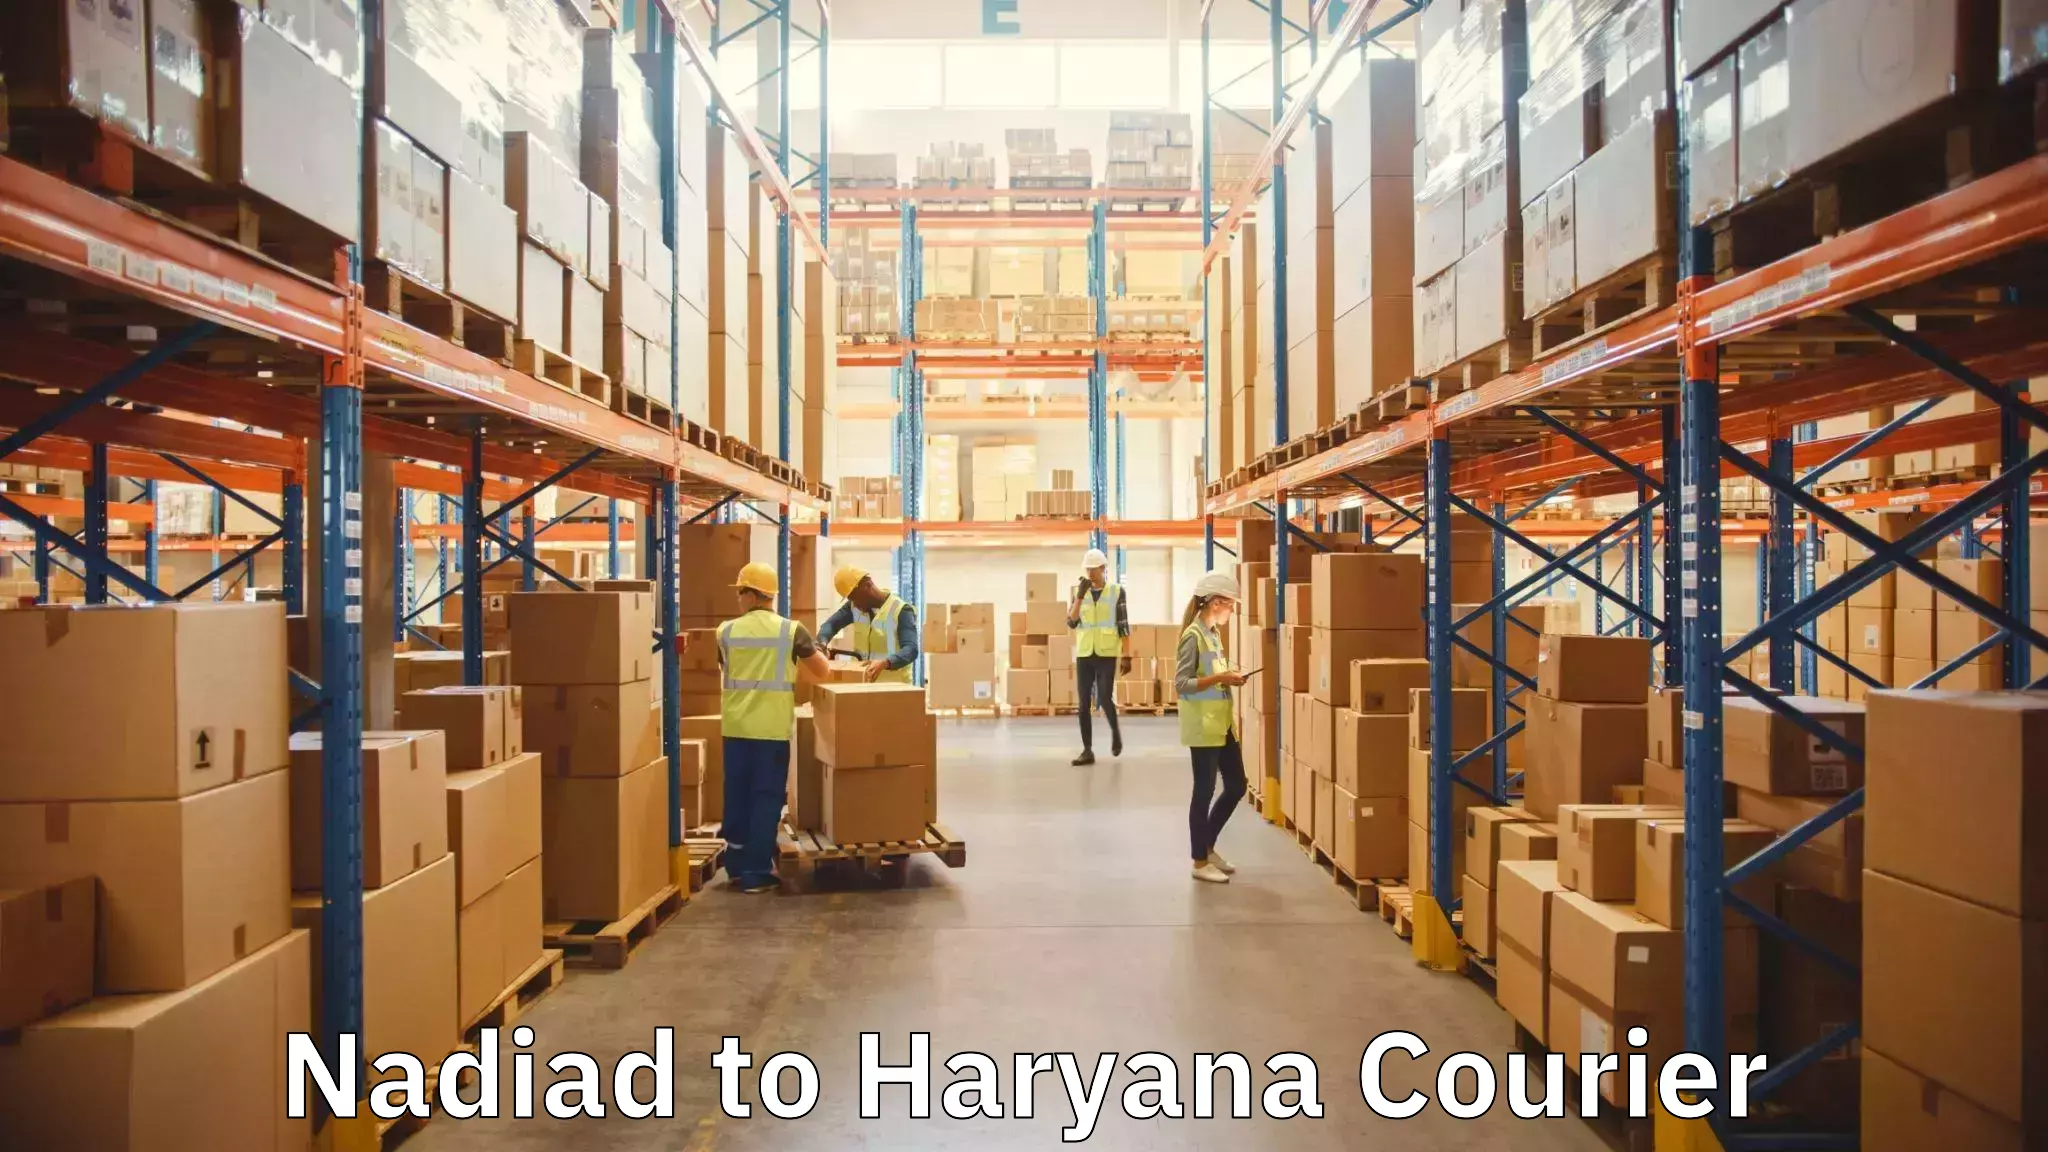 Furniture delivery service Nadiad to Hansi